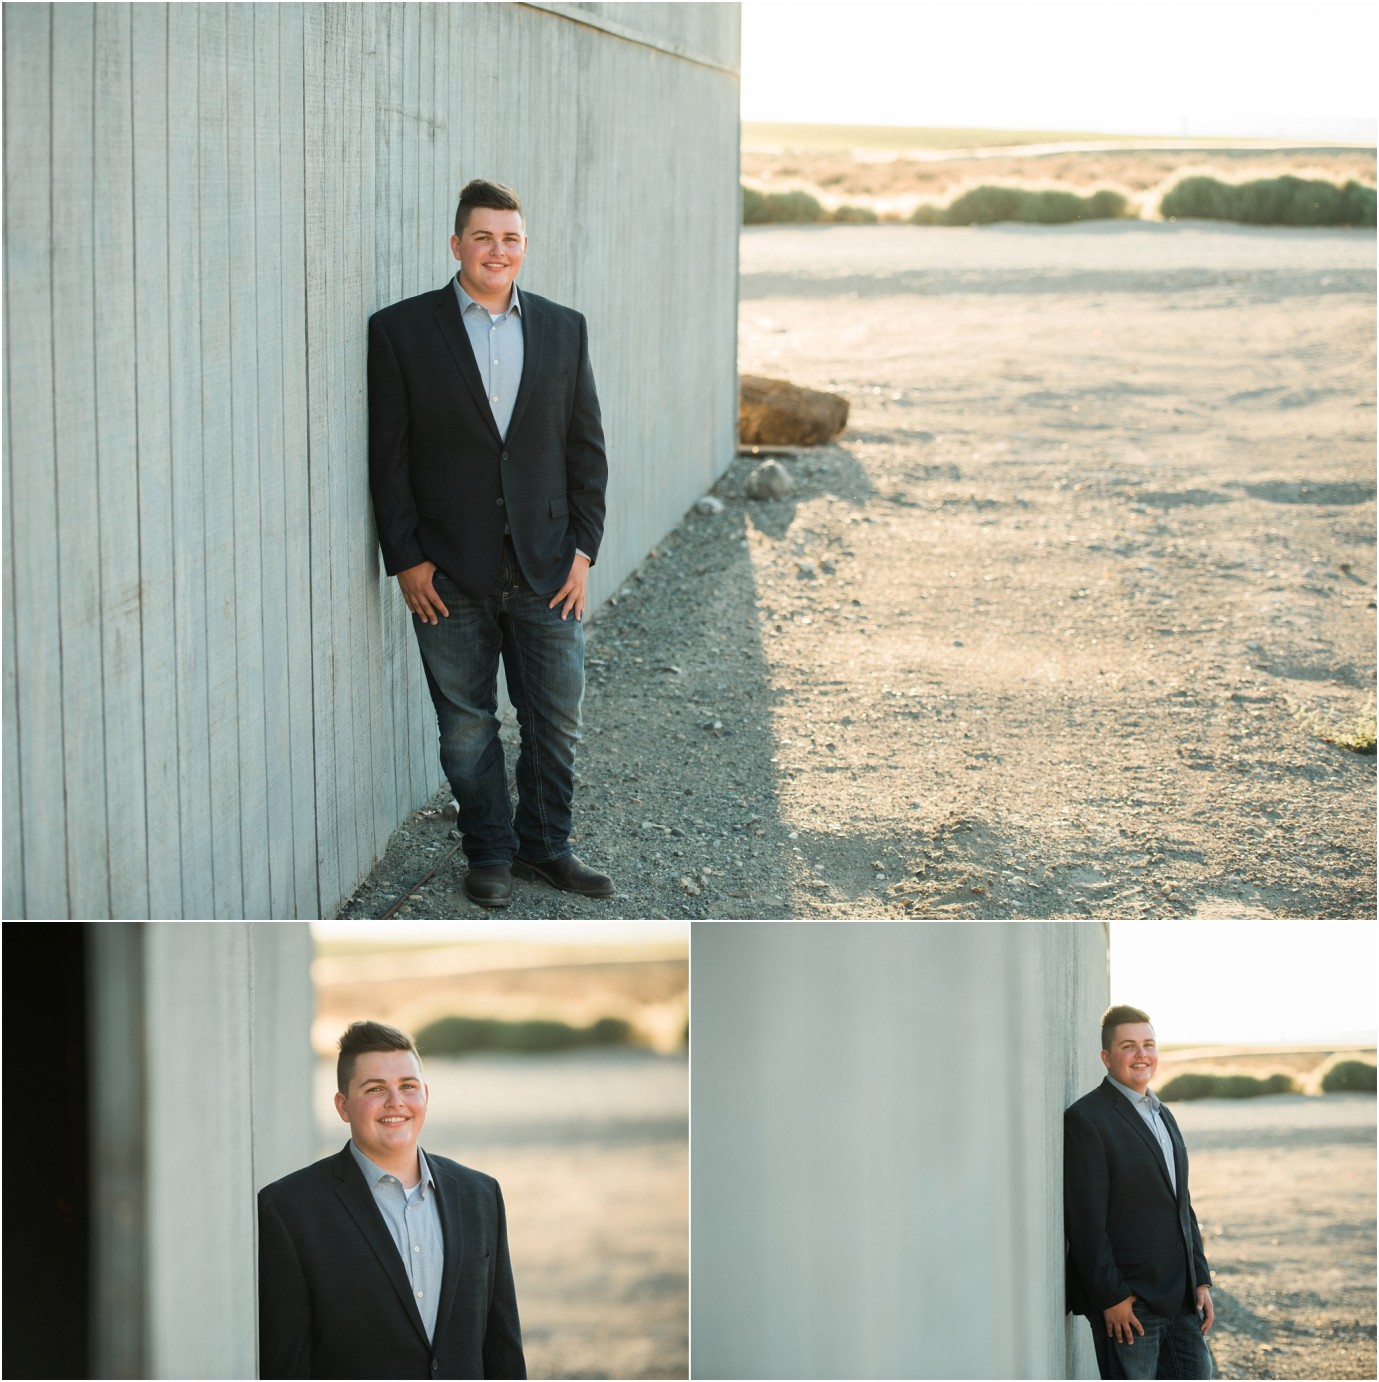 View More: http://mistycphotography.pass.us/davids-senior-session